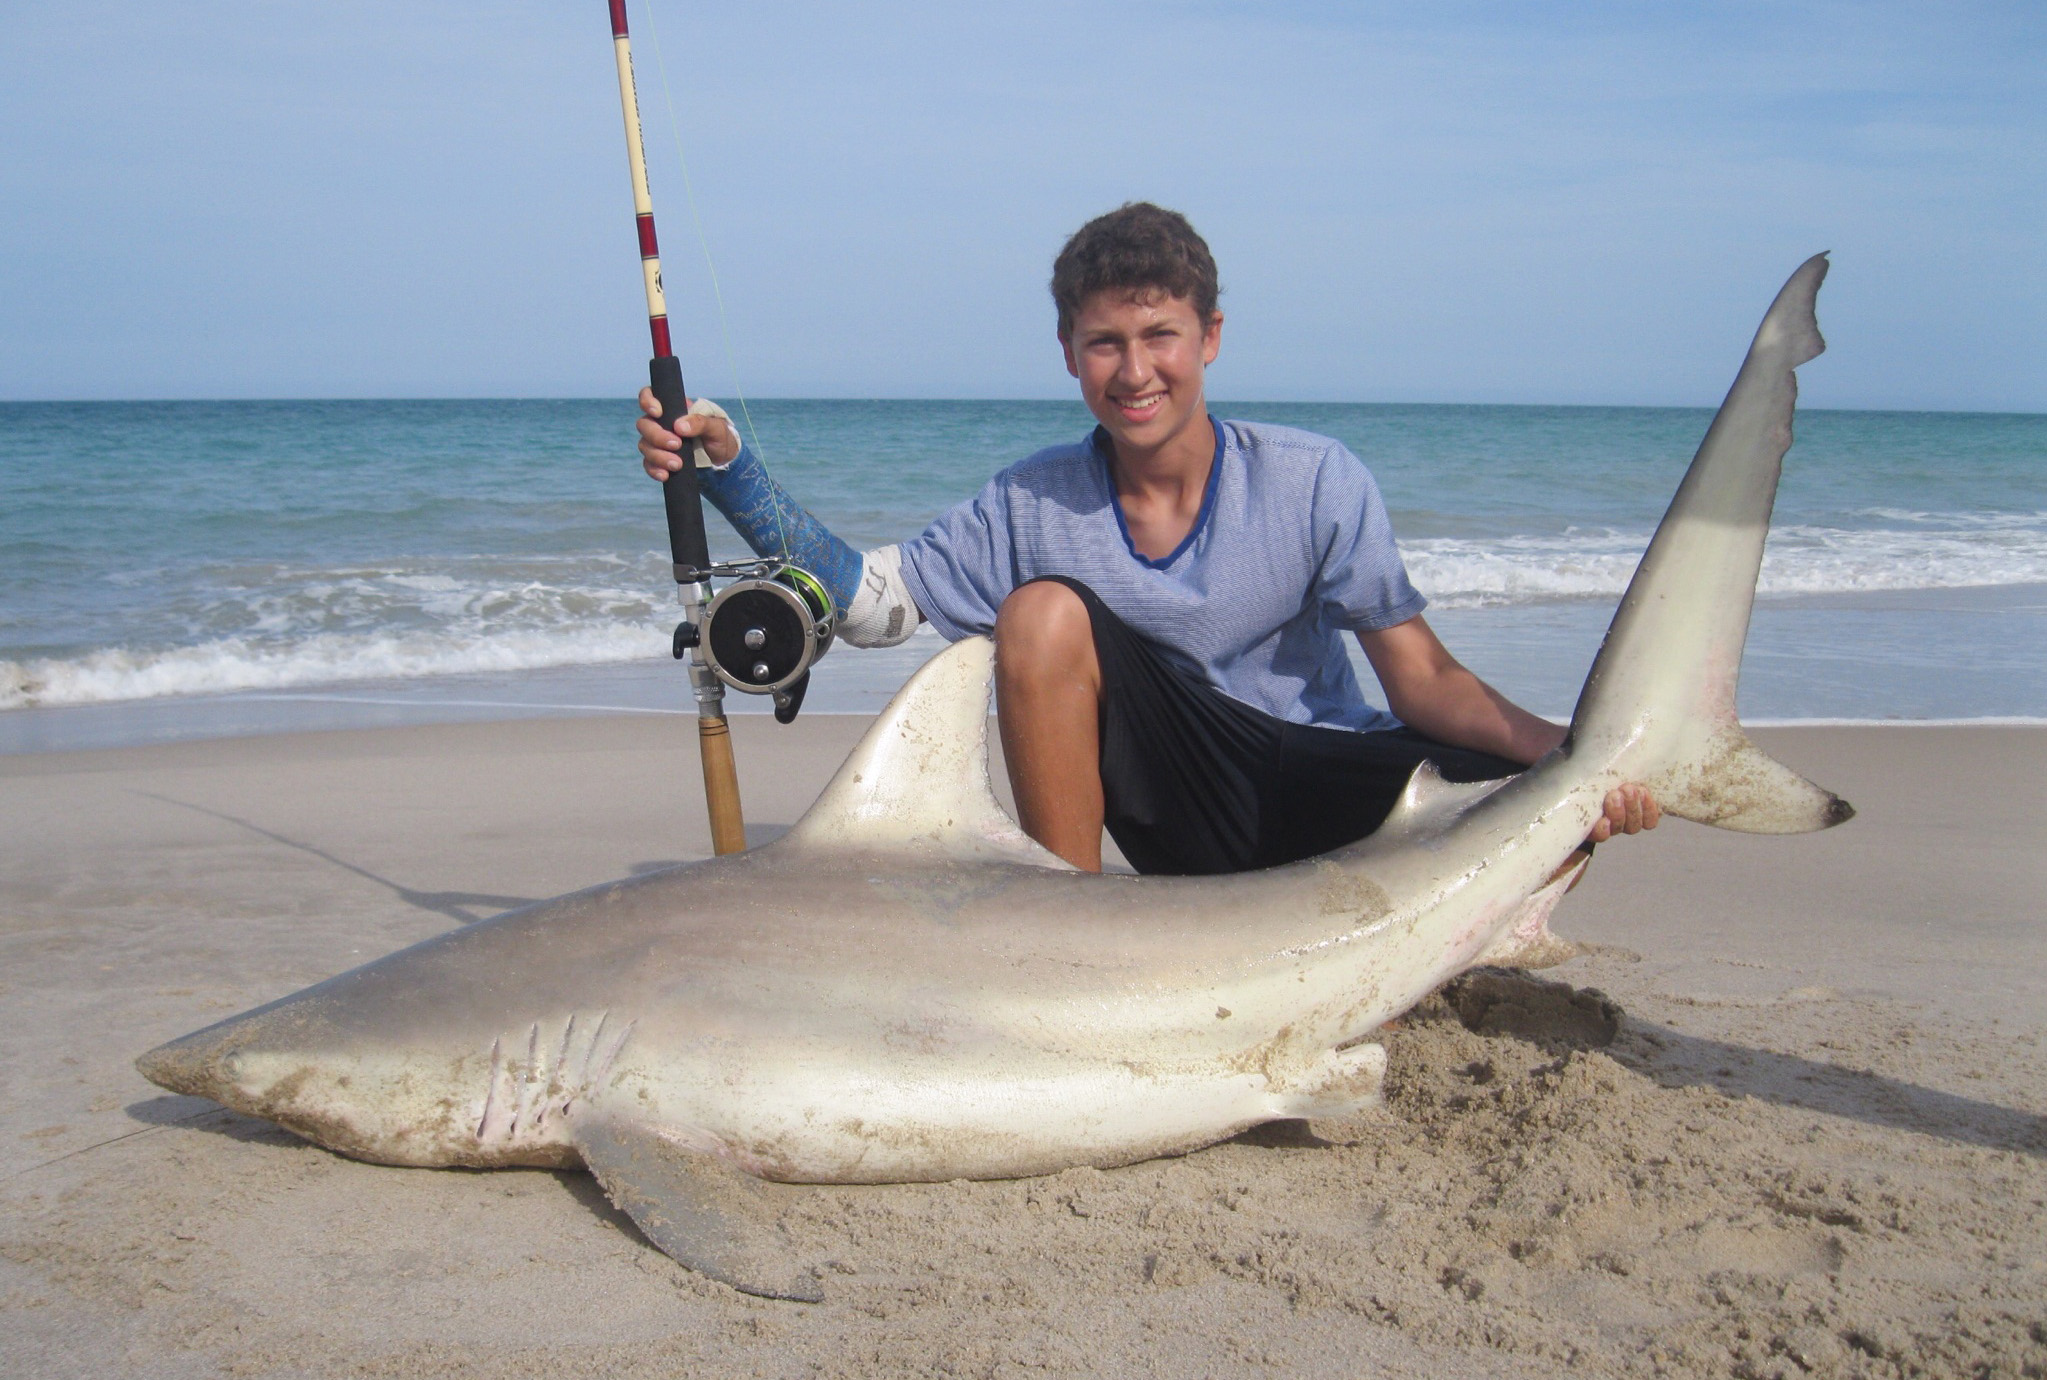 Shark Fishing - How to Find or Catch Bait